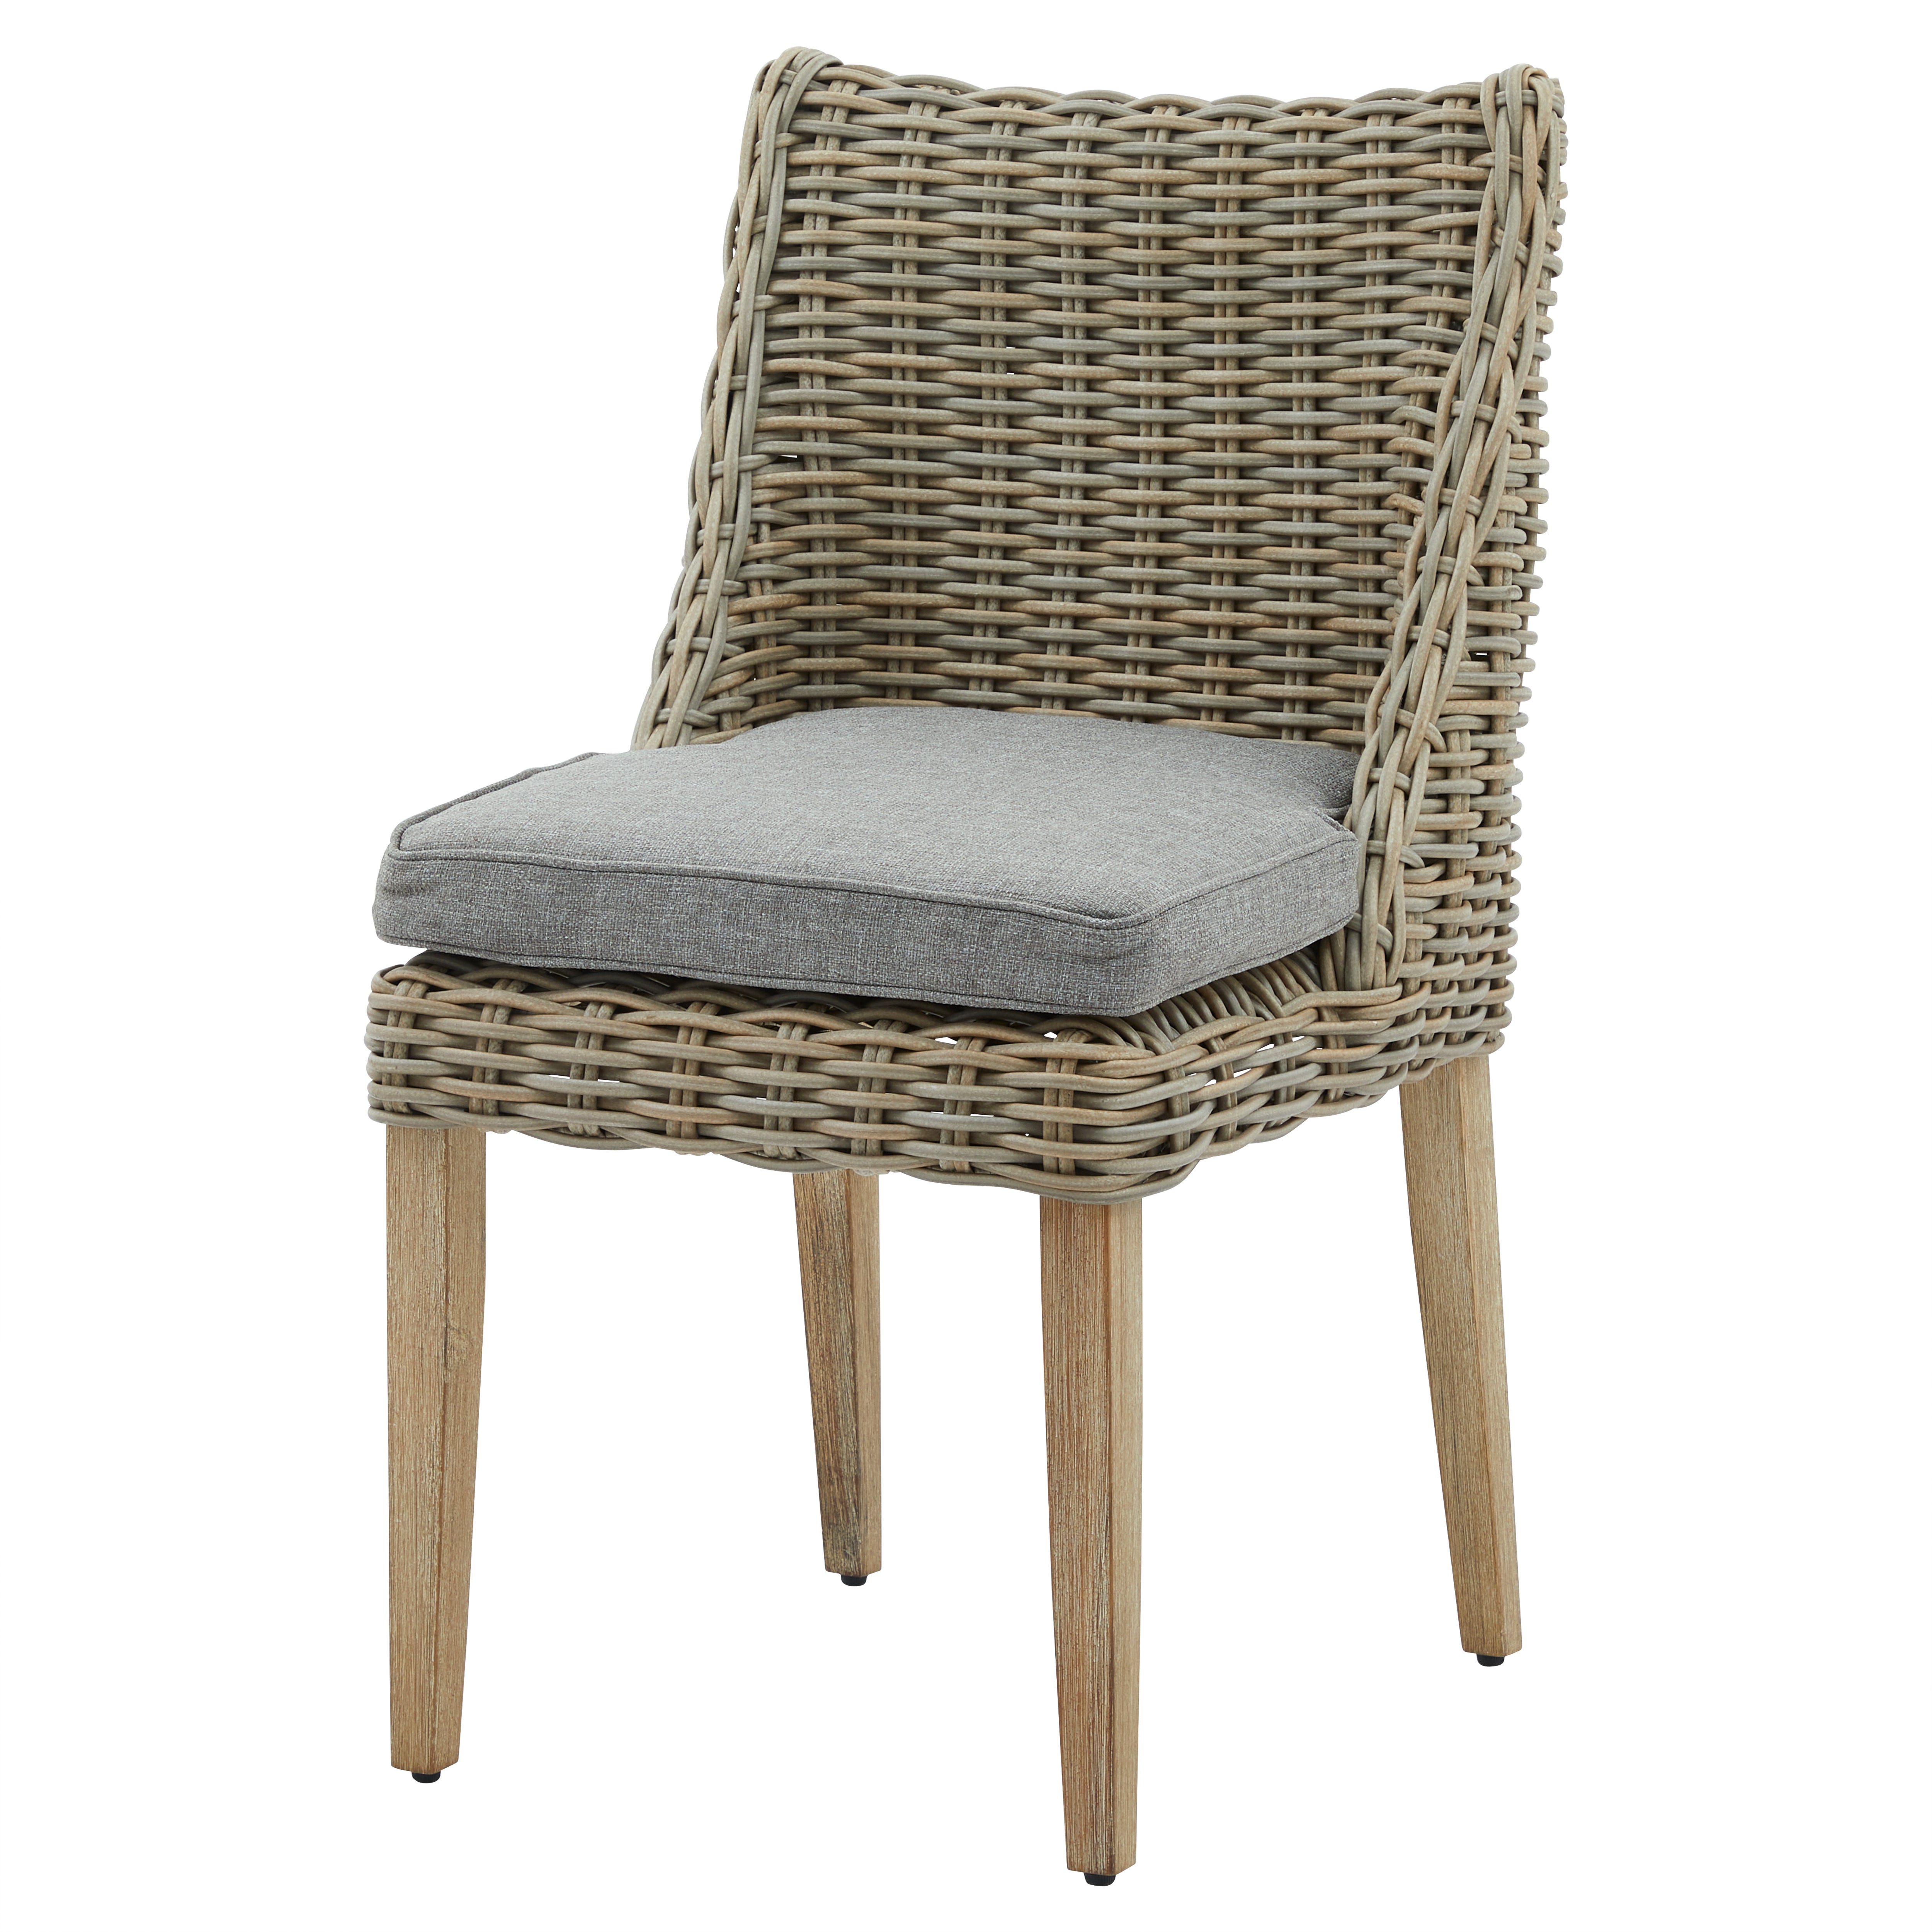 Amalfi Outdoor Round Dining Chair - HUS & CO.